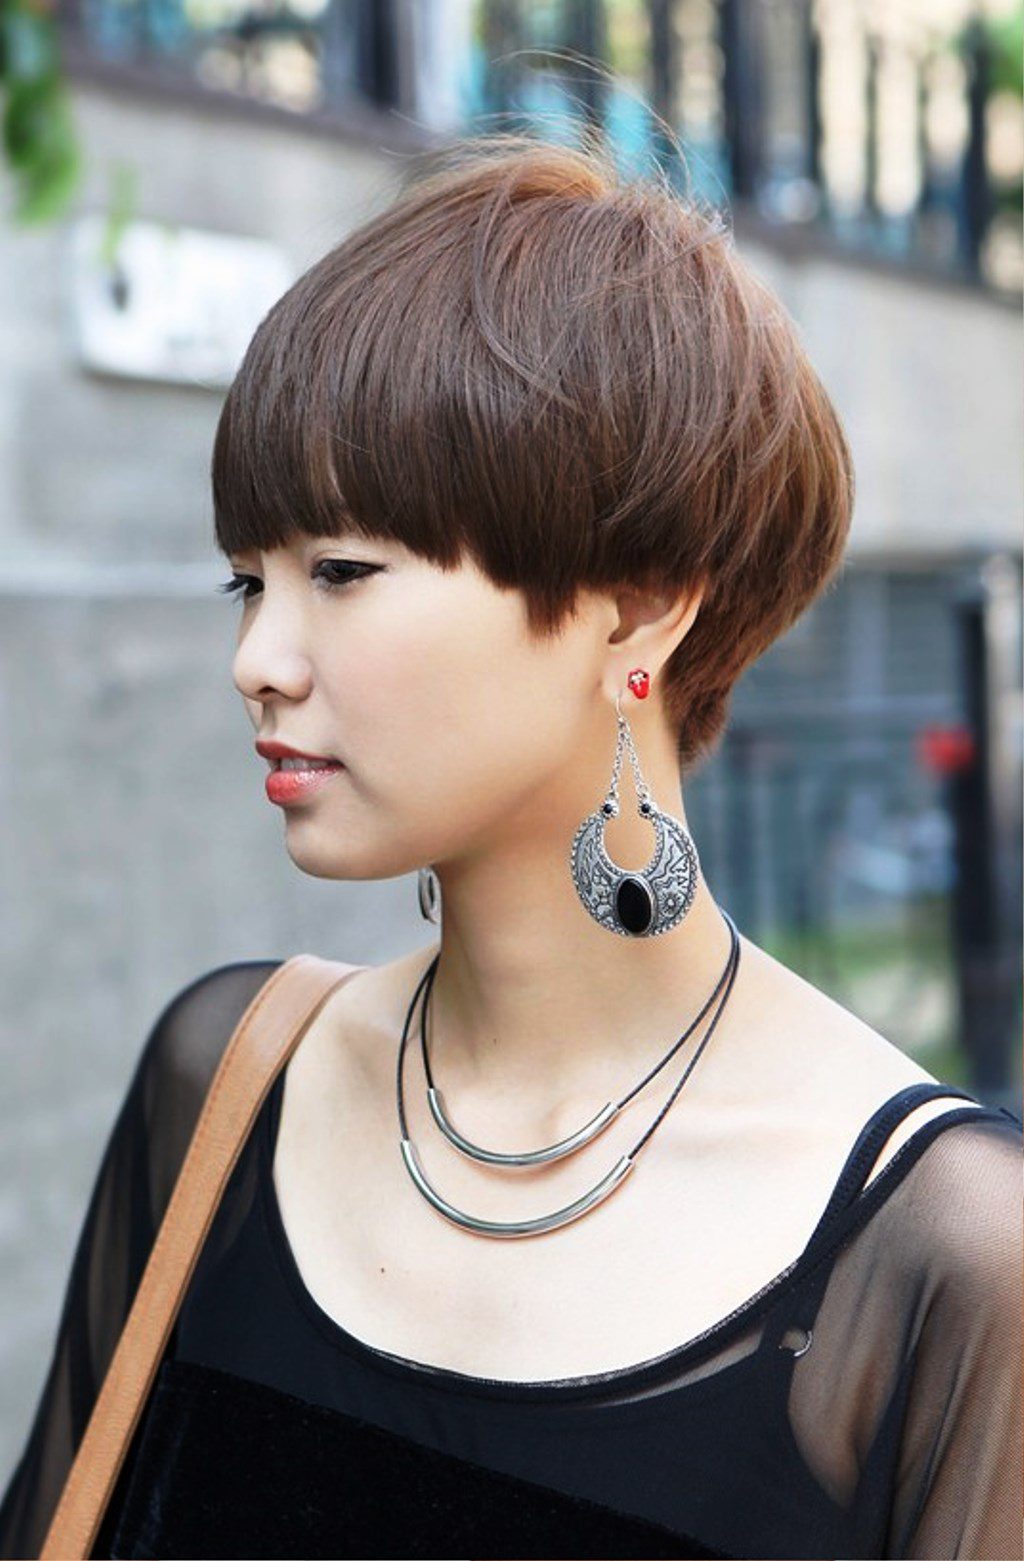 Pictures of Female Boyish Short Hairstyle